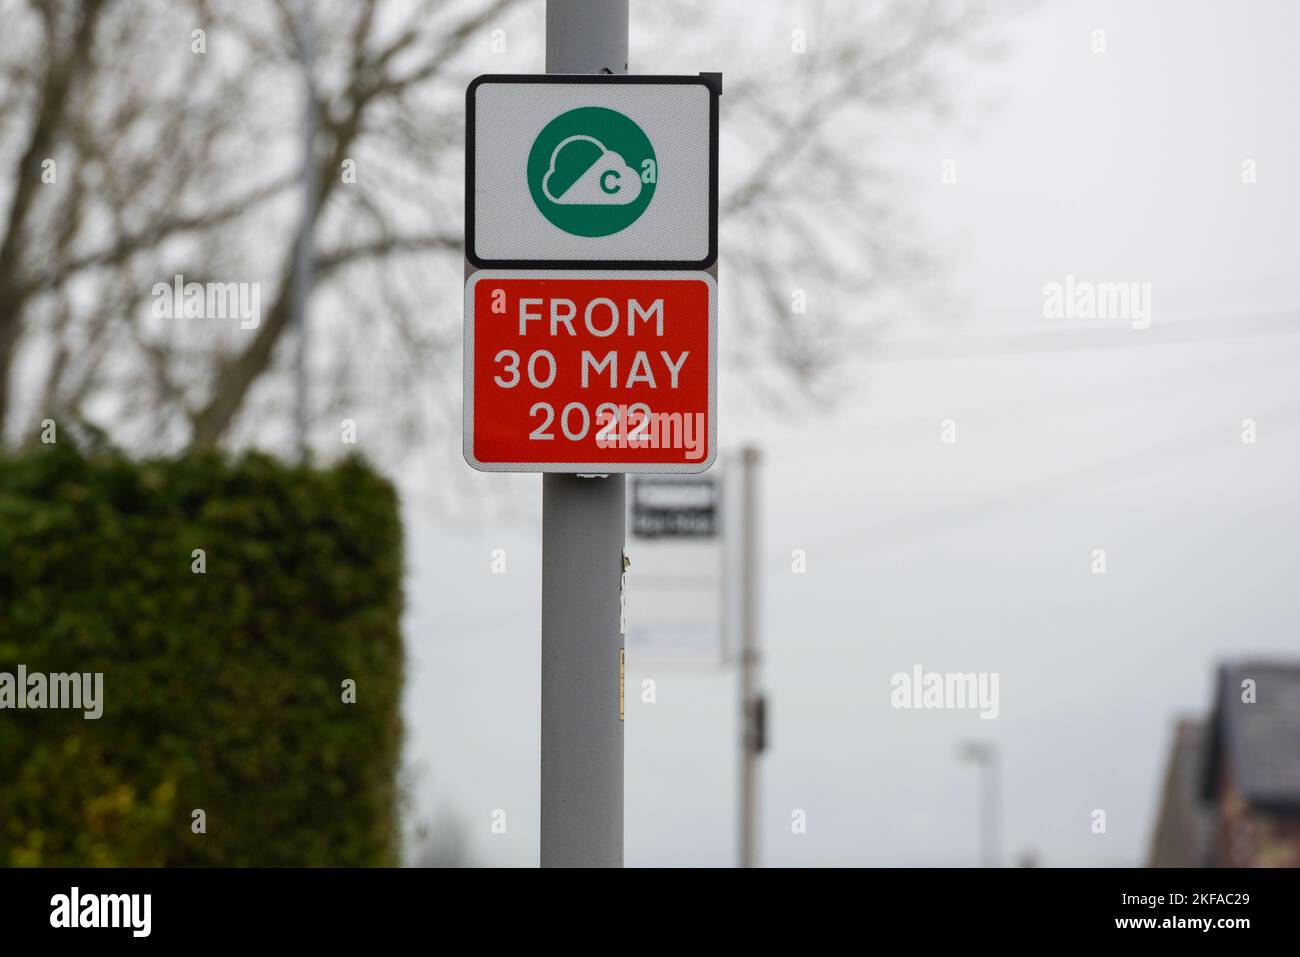 Edenfield, Greater Manchester. Brand new road sign showing the controversial Clean Air Zone which will operate from 30 May 2022 Stock Photo